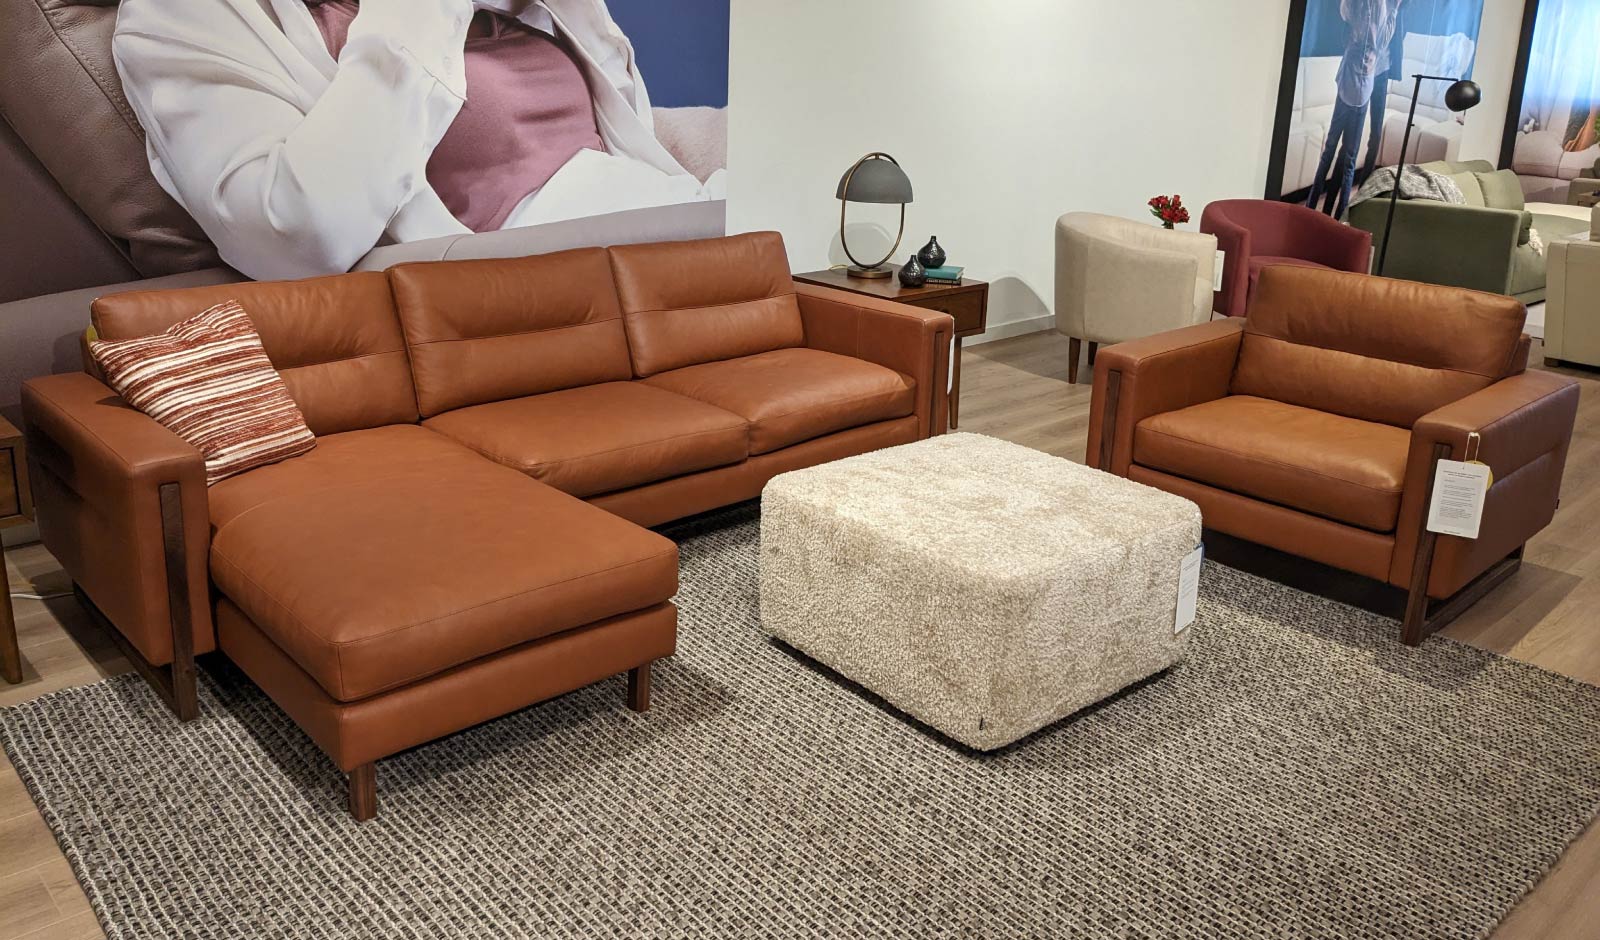 A tan leather sofa with wood accents and matching chair from Palliser